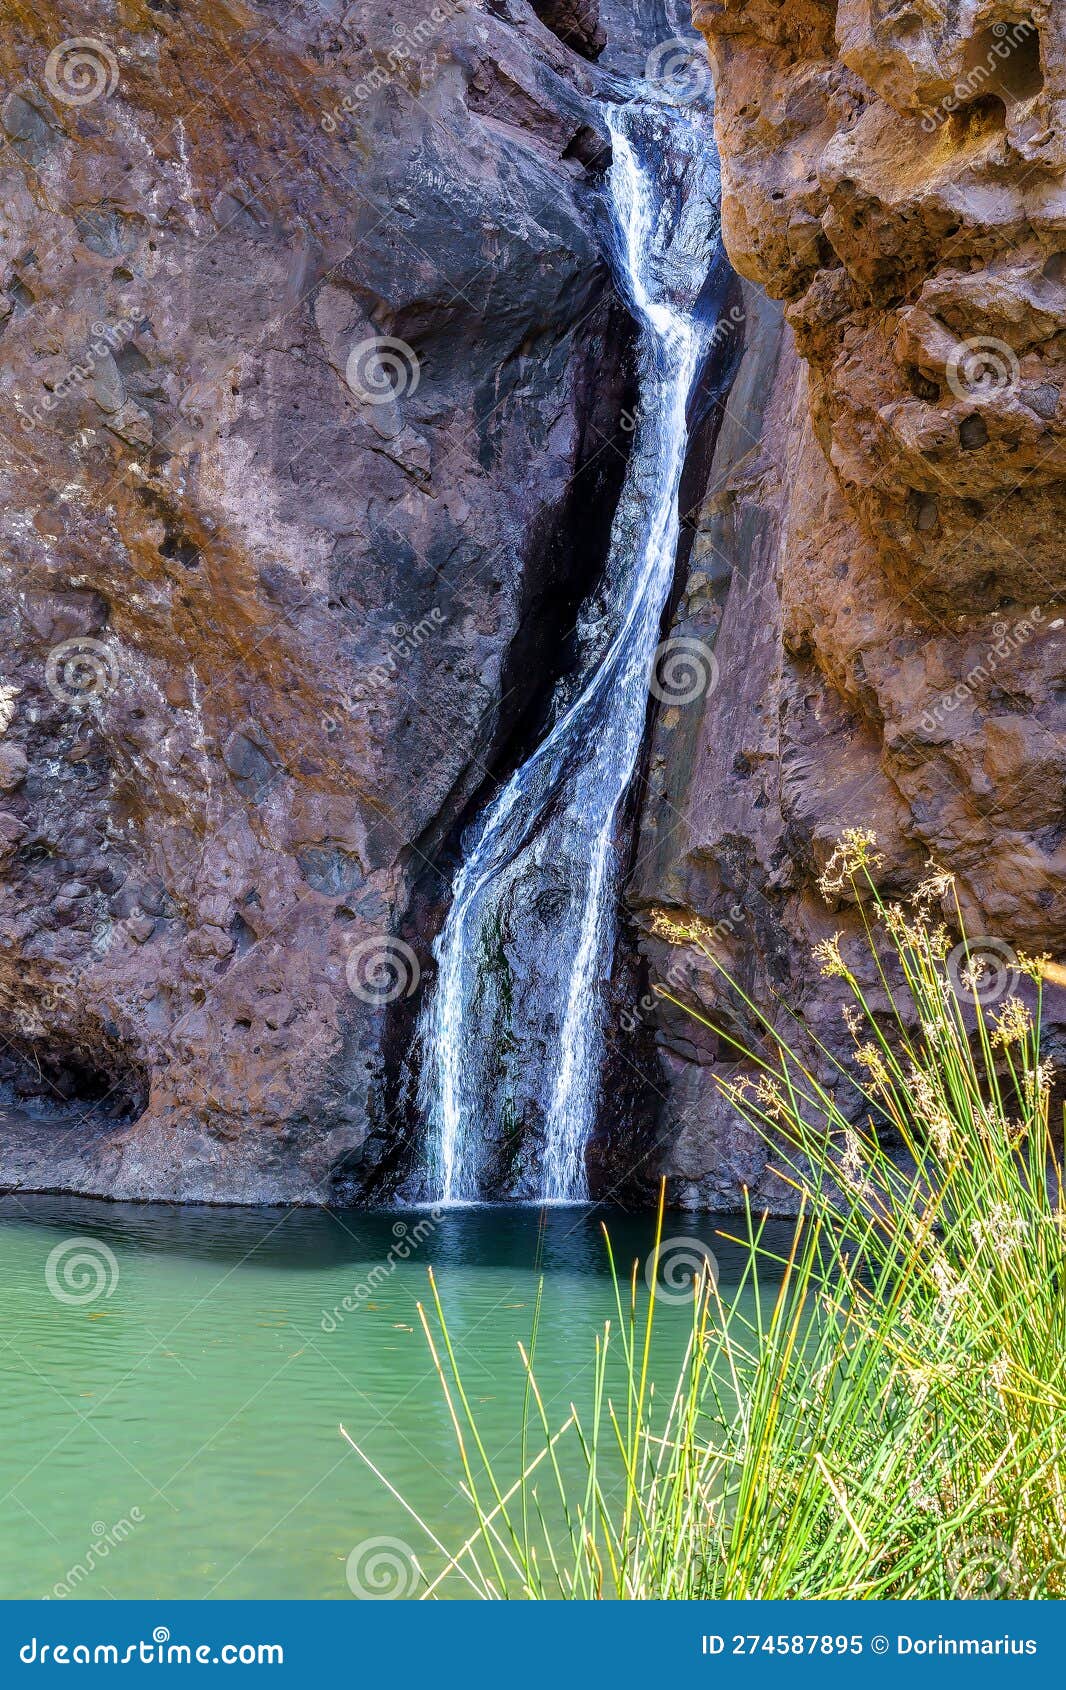 landscape with el charco azul waterfall, gran canary